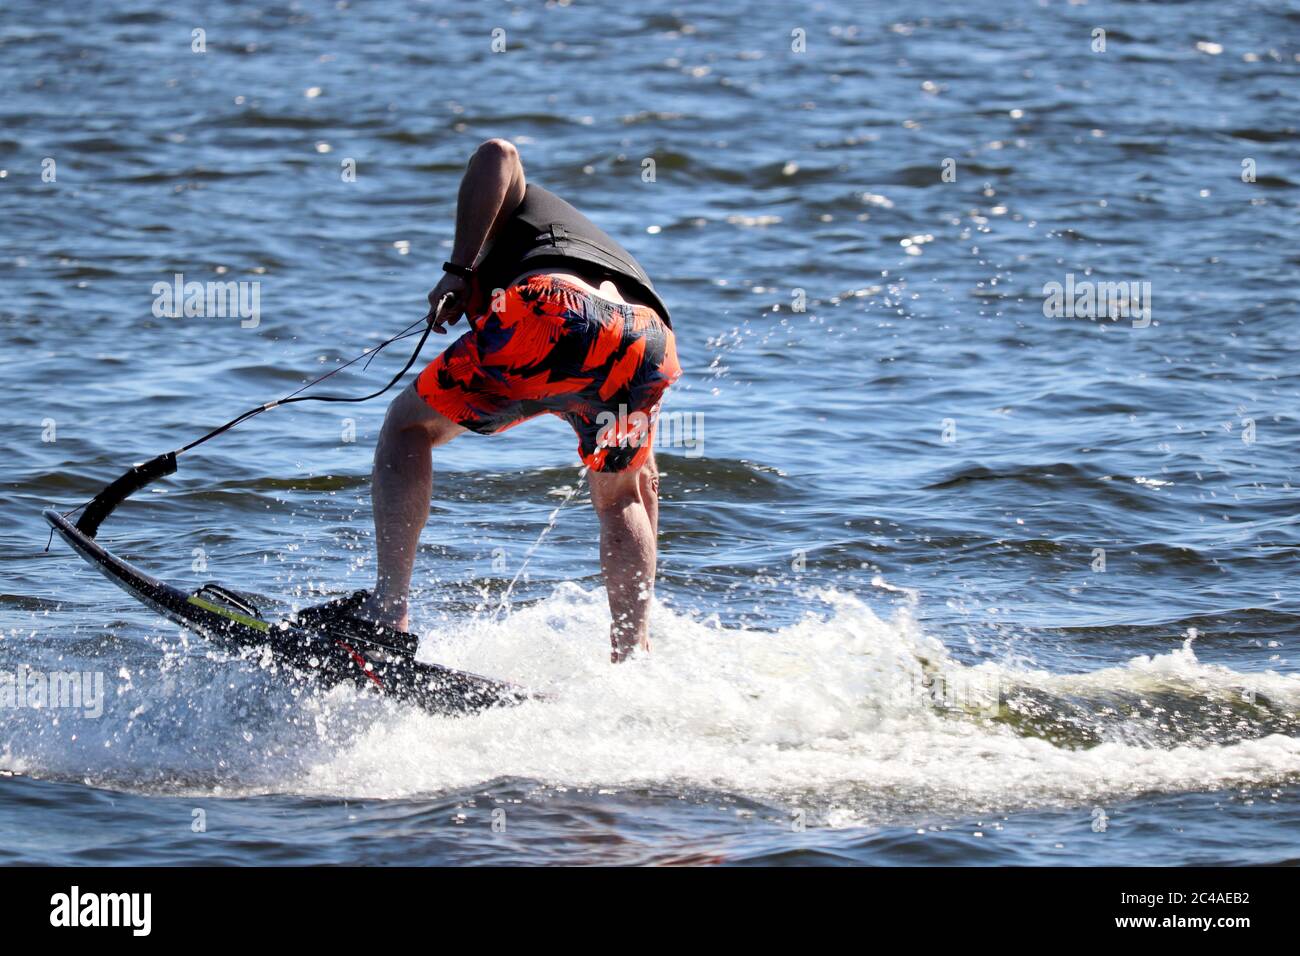 Jet surfing on a water, man riding on jet surfboard. Surfer on the sea, summer sport Stock Photo